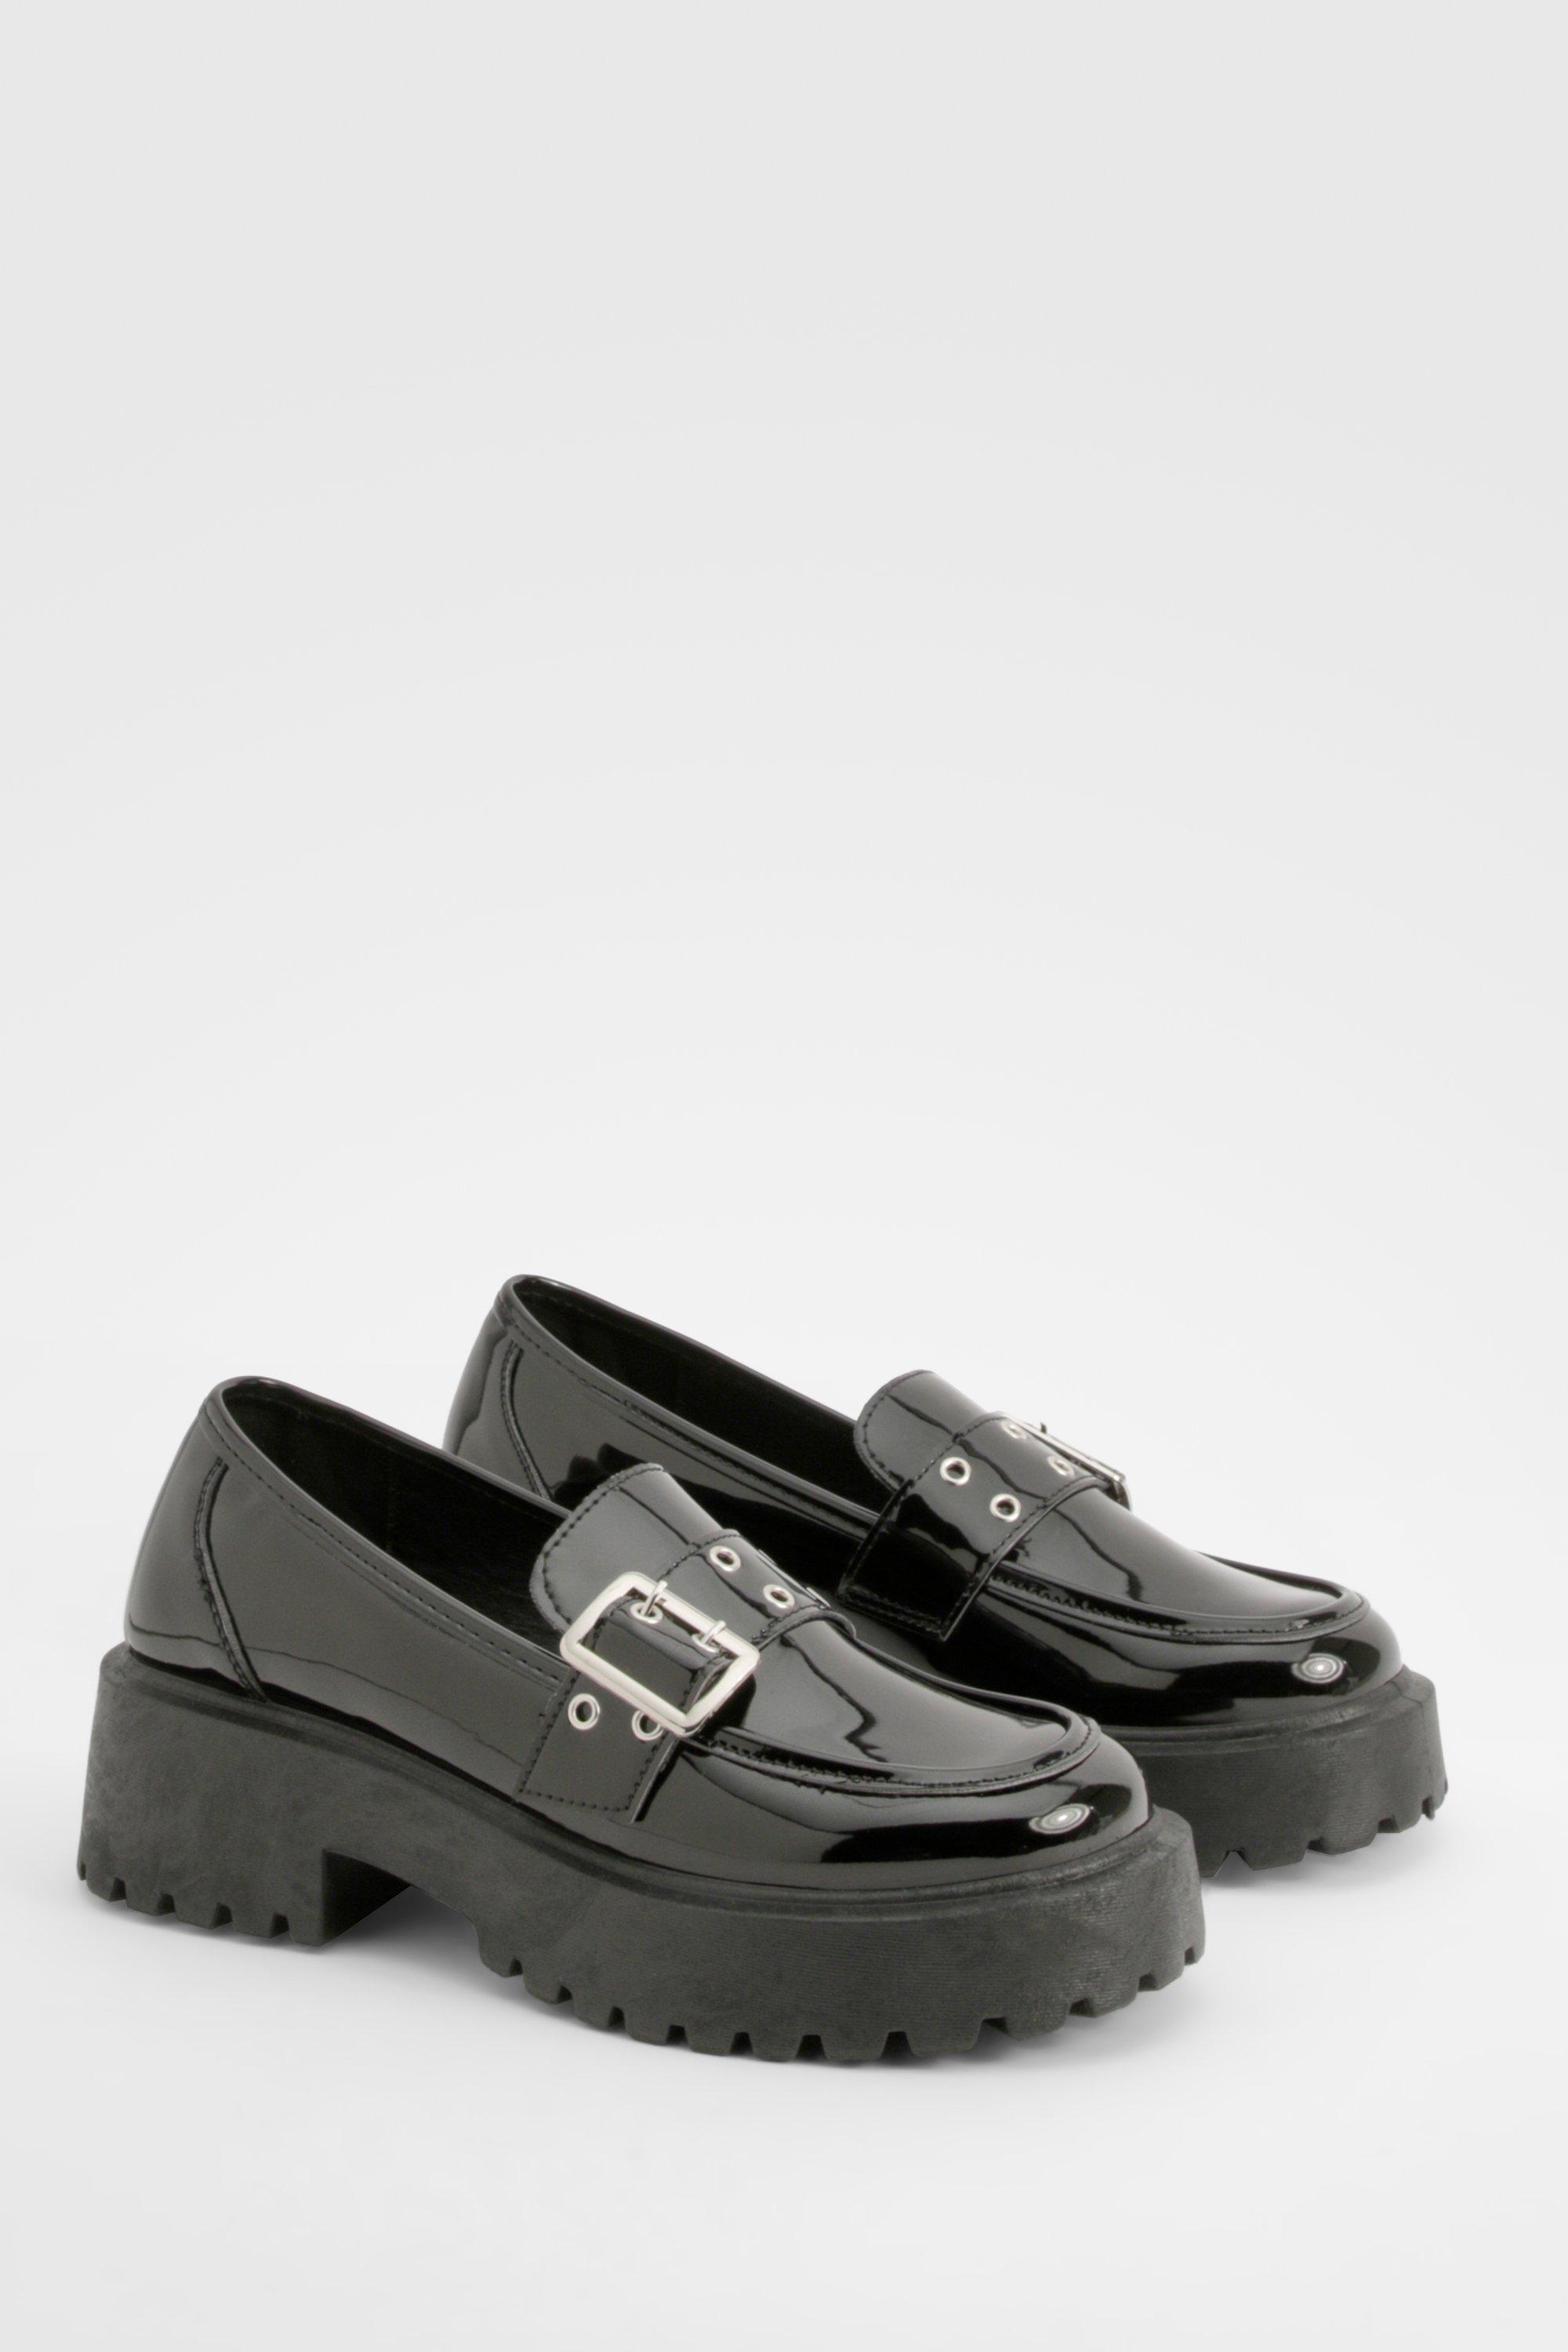 Boohoo Chunky Sole Patent Buckle Loafers, Black